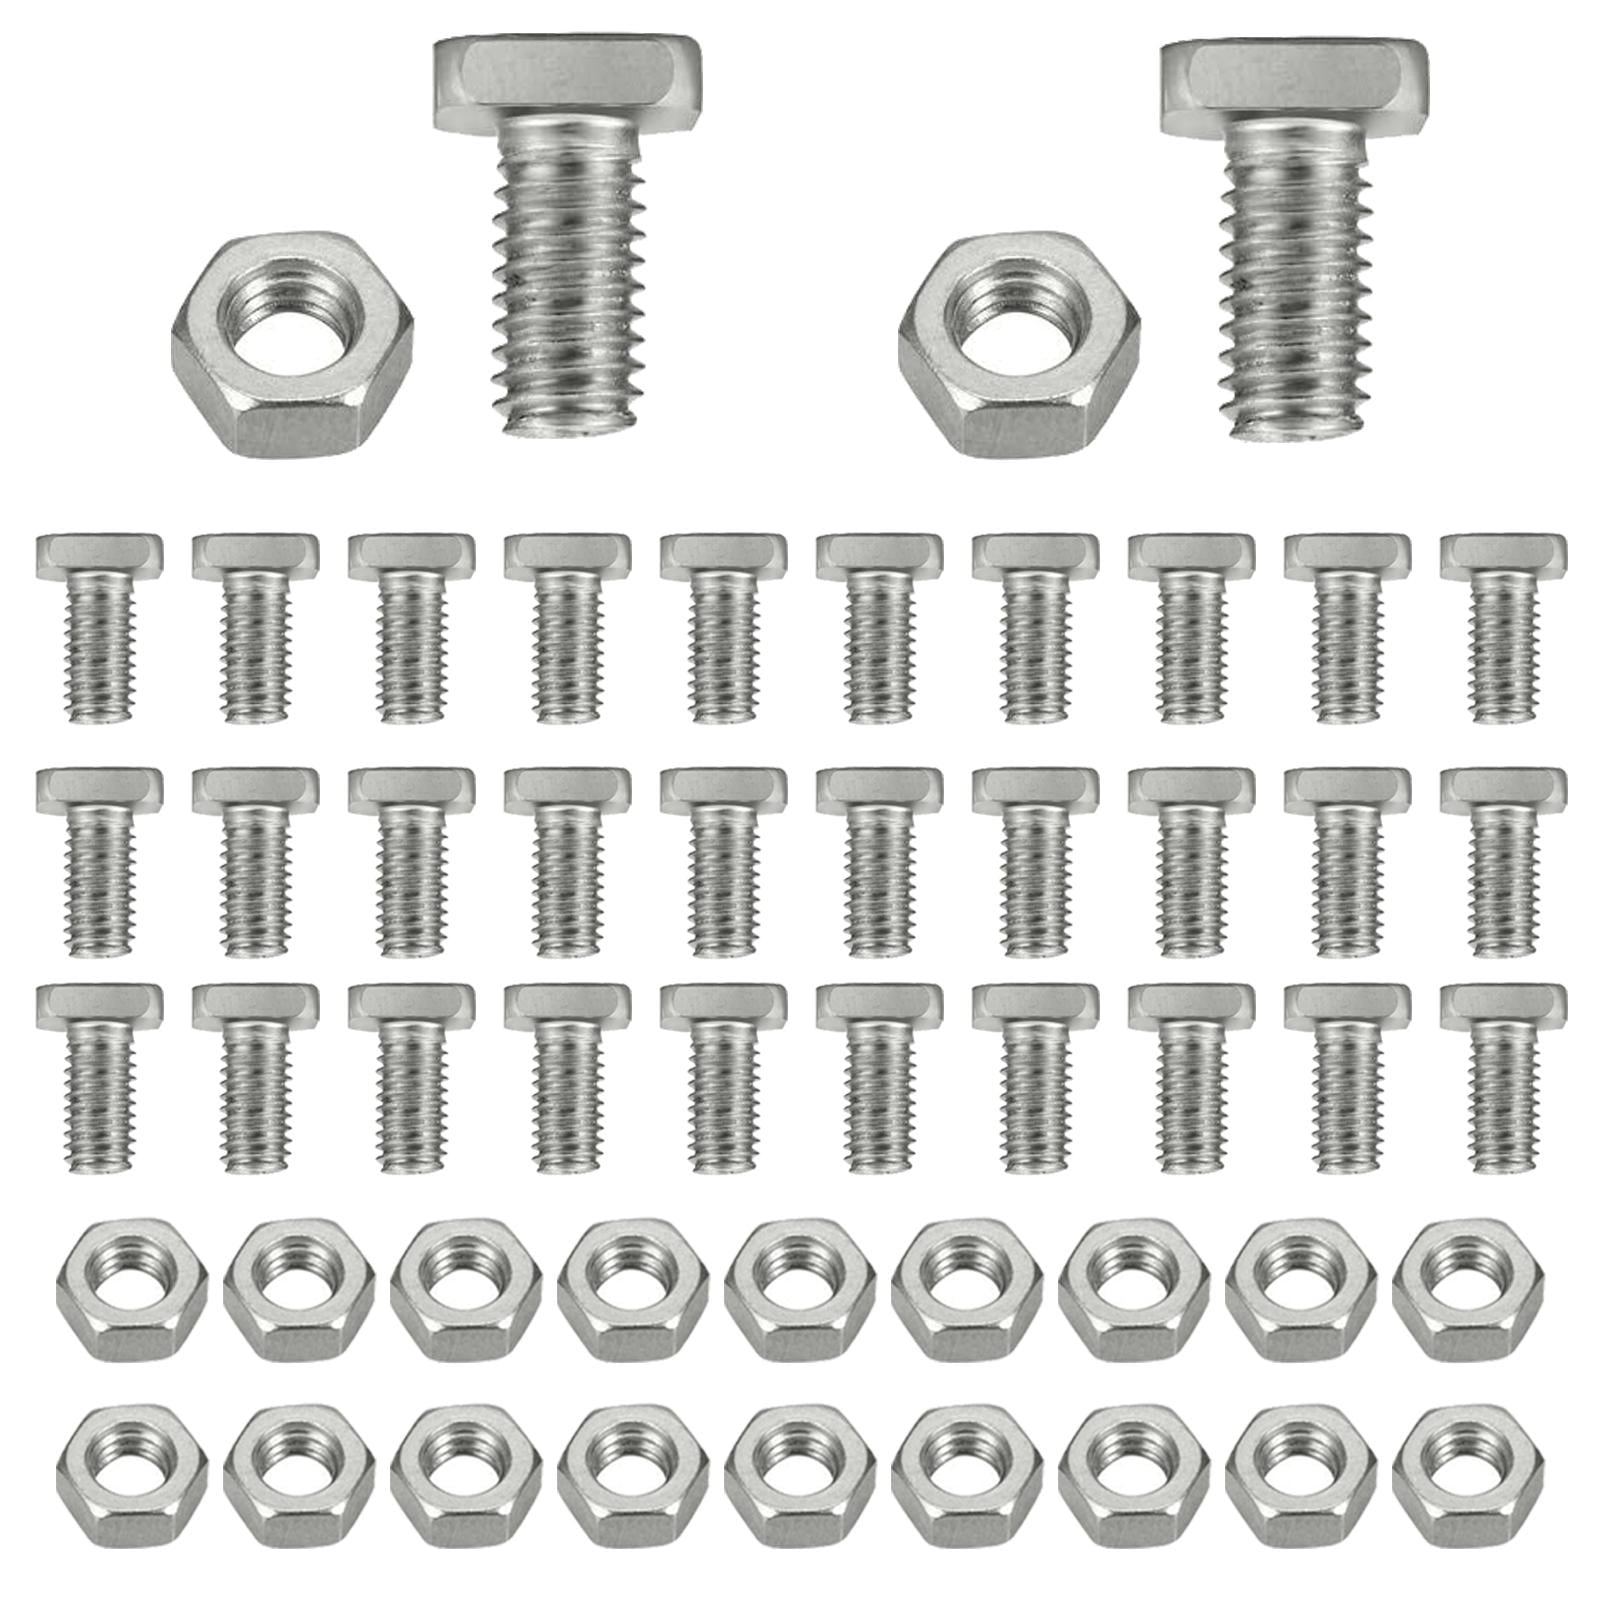 see also our clips NUTS 10 TO 100  ALUMINIUM GREENHOUSE CROPPED HEAD 11MM BOLTS 